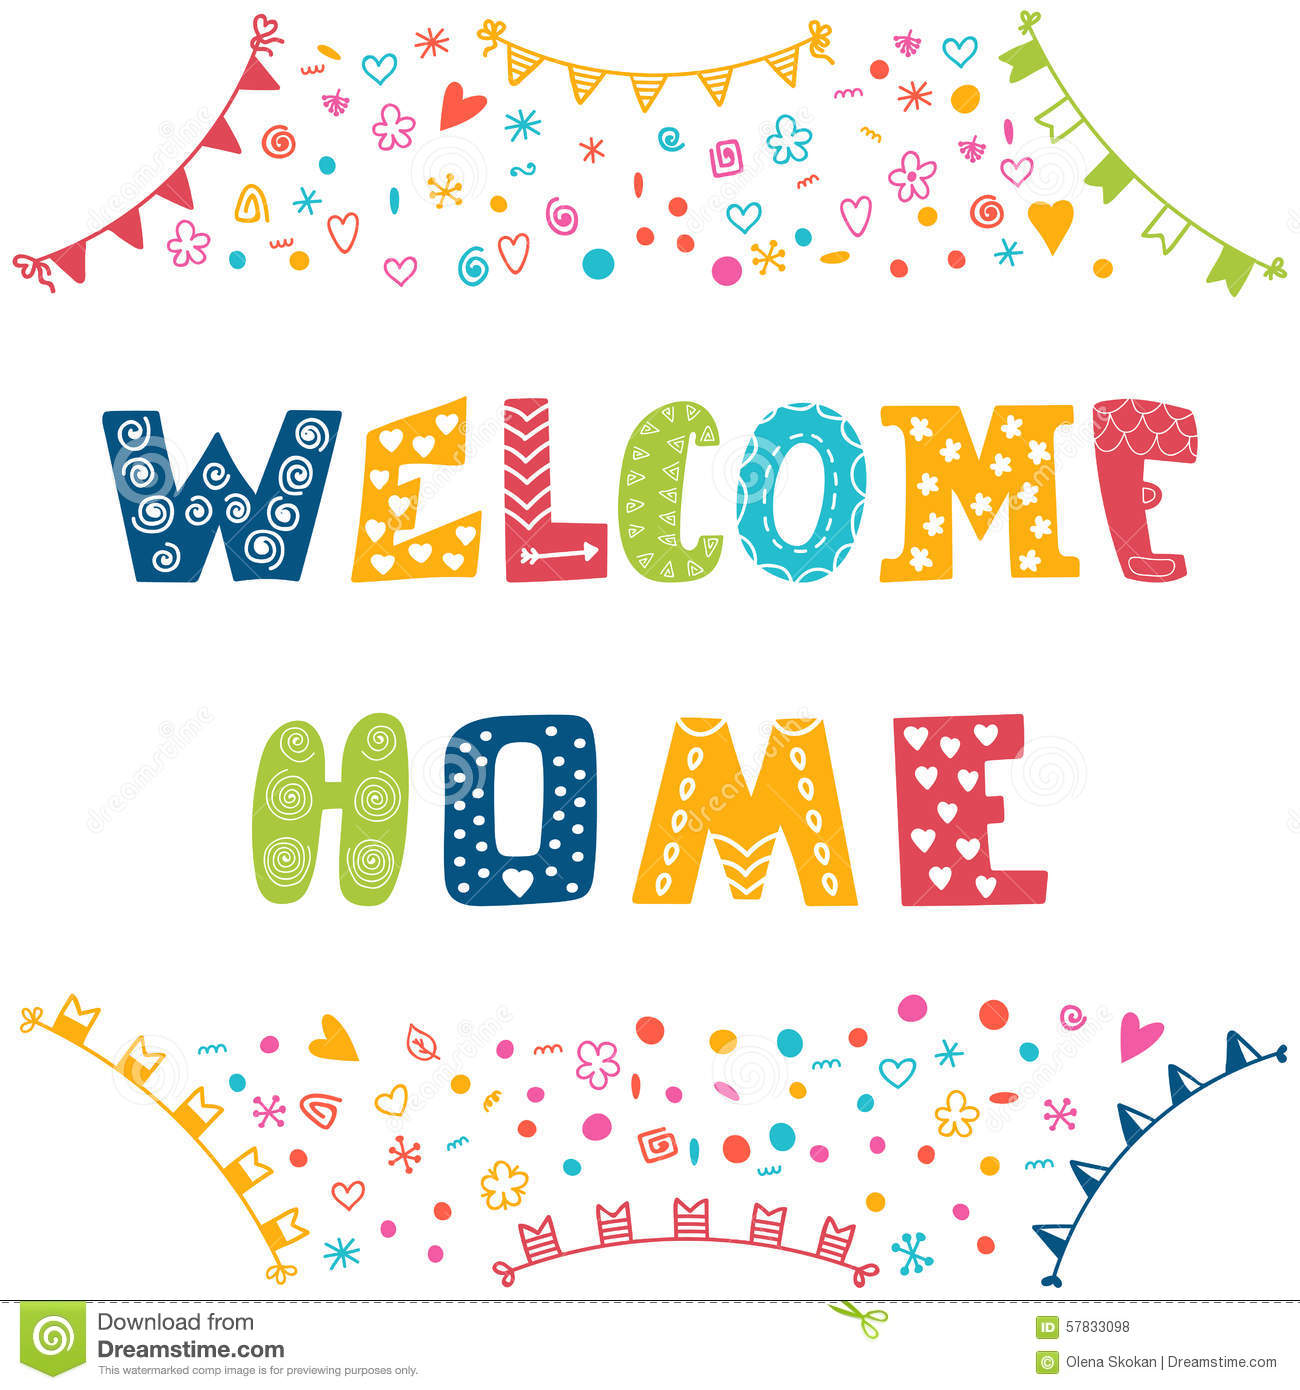 Latest Welcome Home Clip Art 